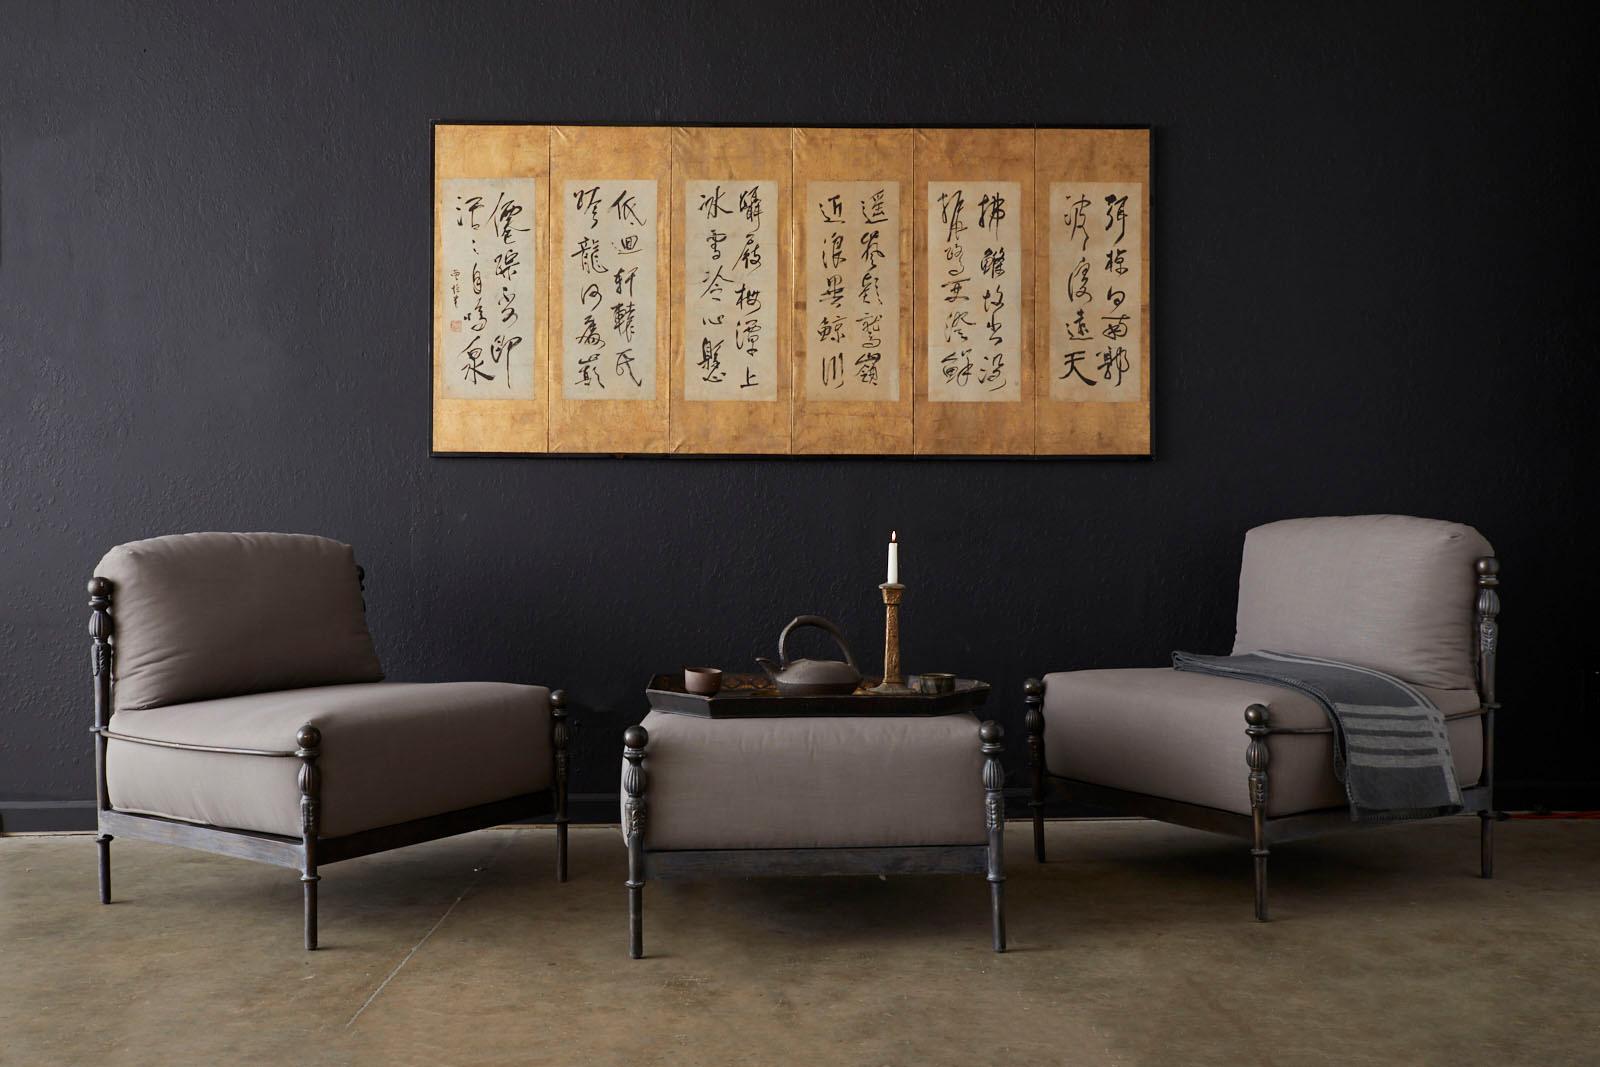 Large Japanese late Meiji period six panel screen featuring six Chinese brush calligraphy poems in semi-cursive script. Ink on handcrafted paper mounted onto gold leaf squares and set in an ebonized frame. The screen does fold. Beautifully crafted